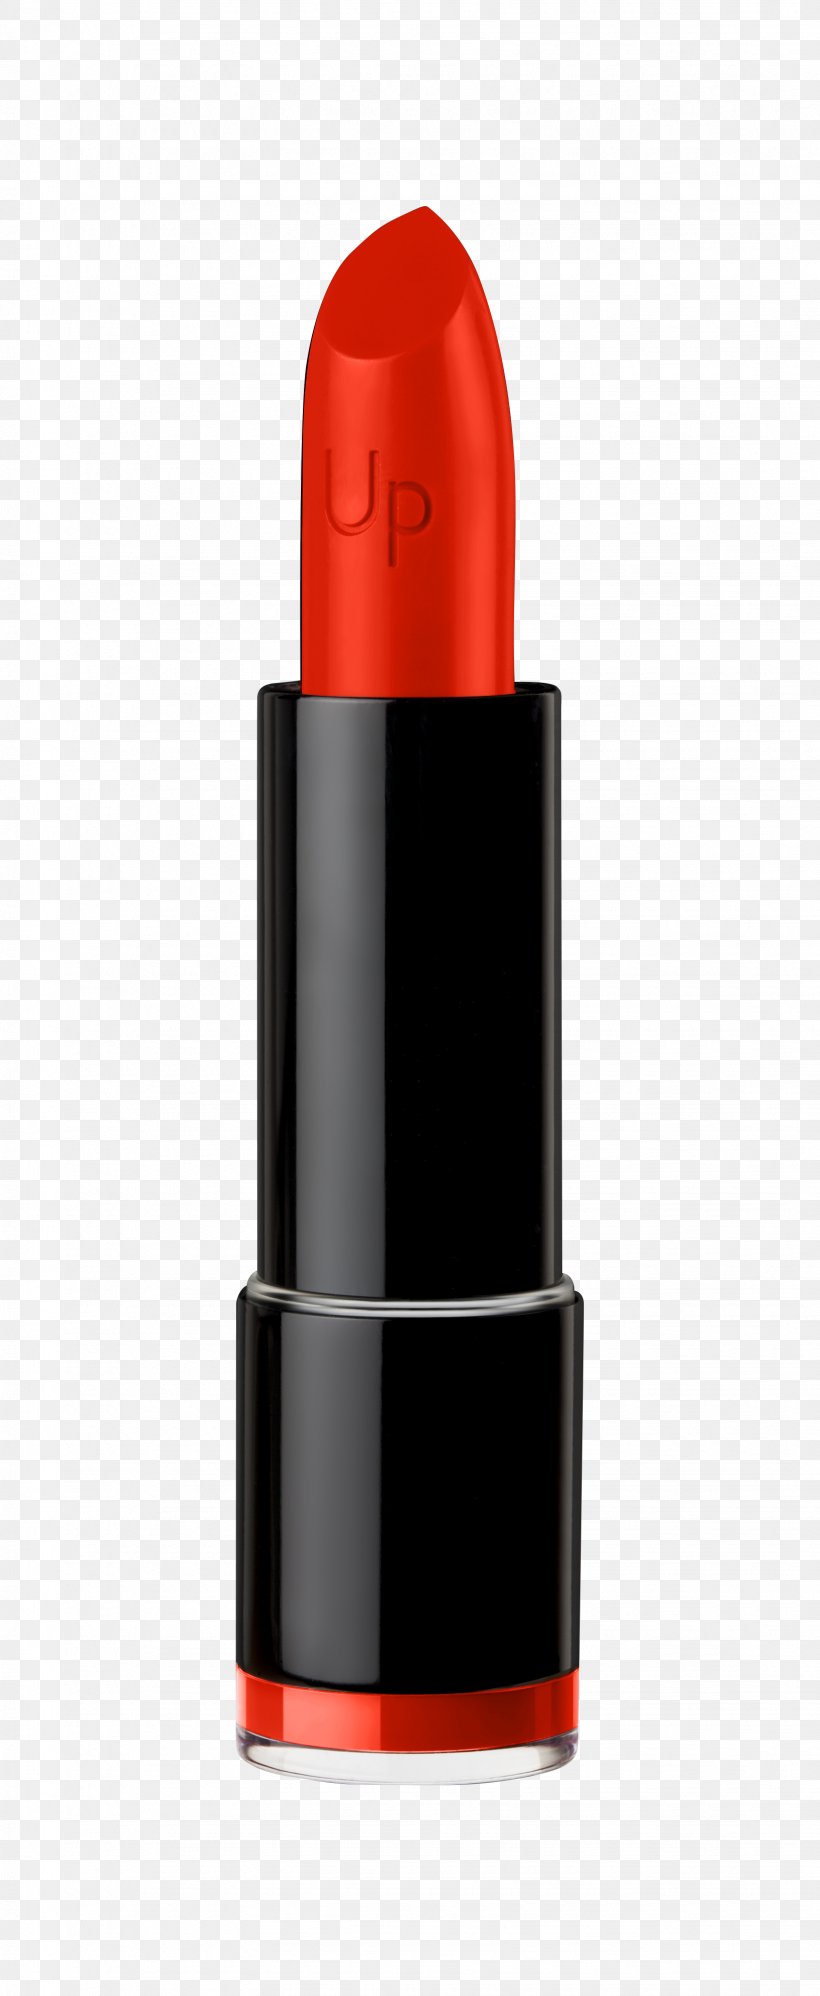 Lipstick Red Make-up Black|Up, PNG, 1635x3981px, Lipstick, Beauty, Blackup, Color, Cosmetics Download Free